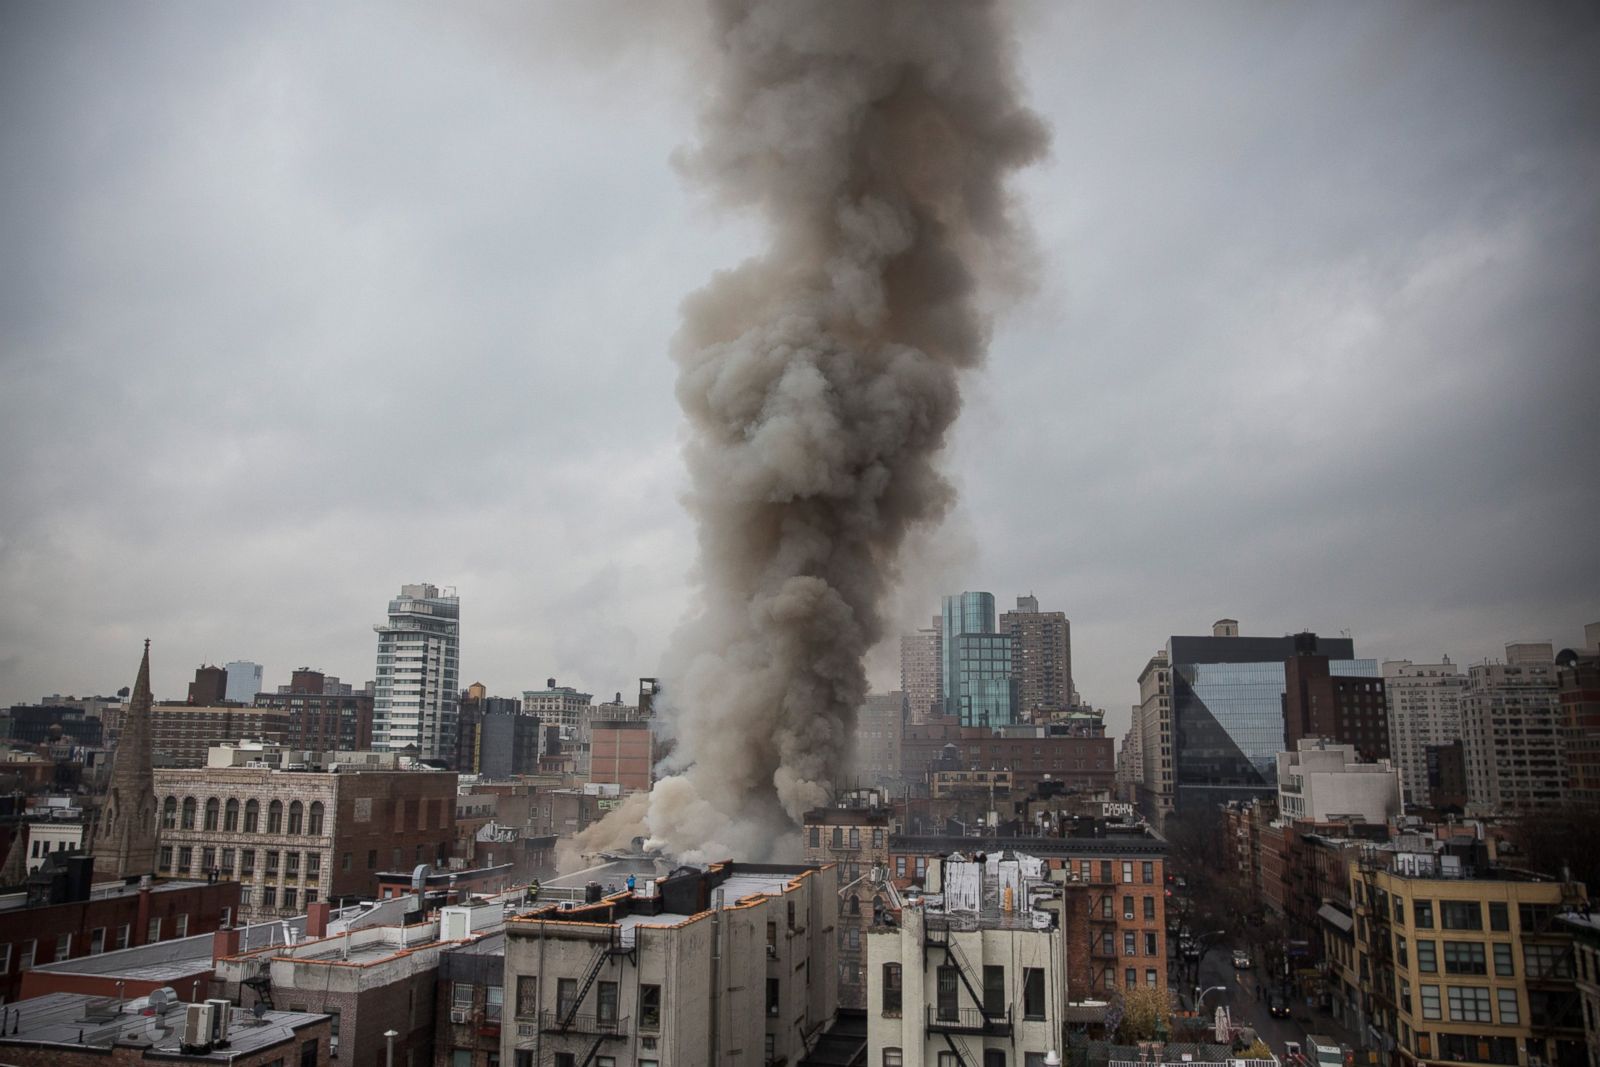 Nyc Fire Building Collapse Summons 275 Firefighters Photos Image 81